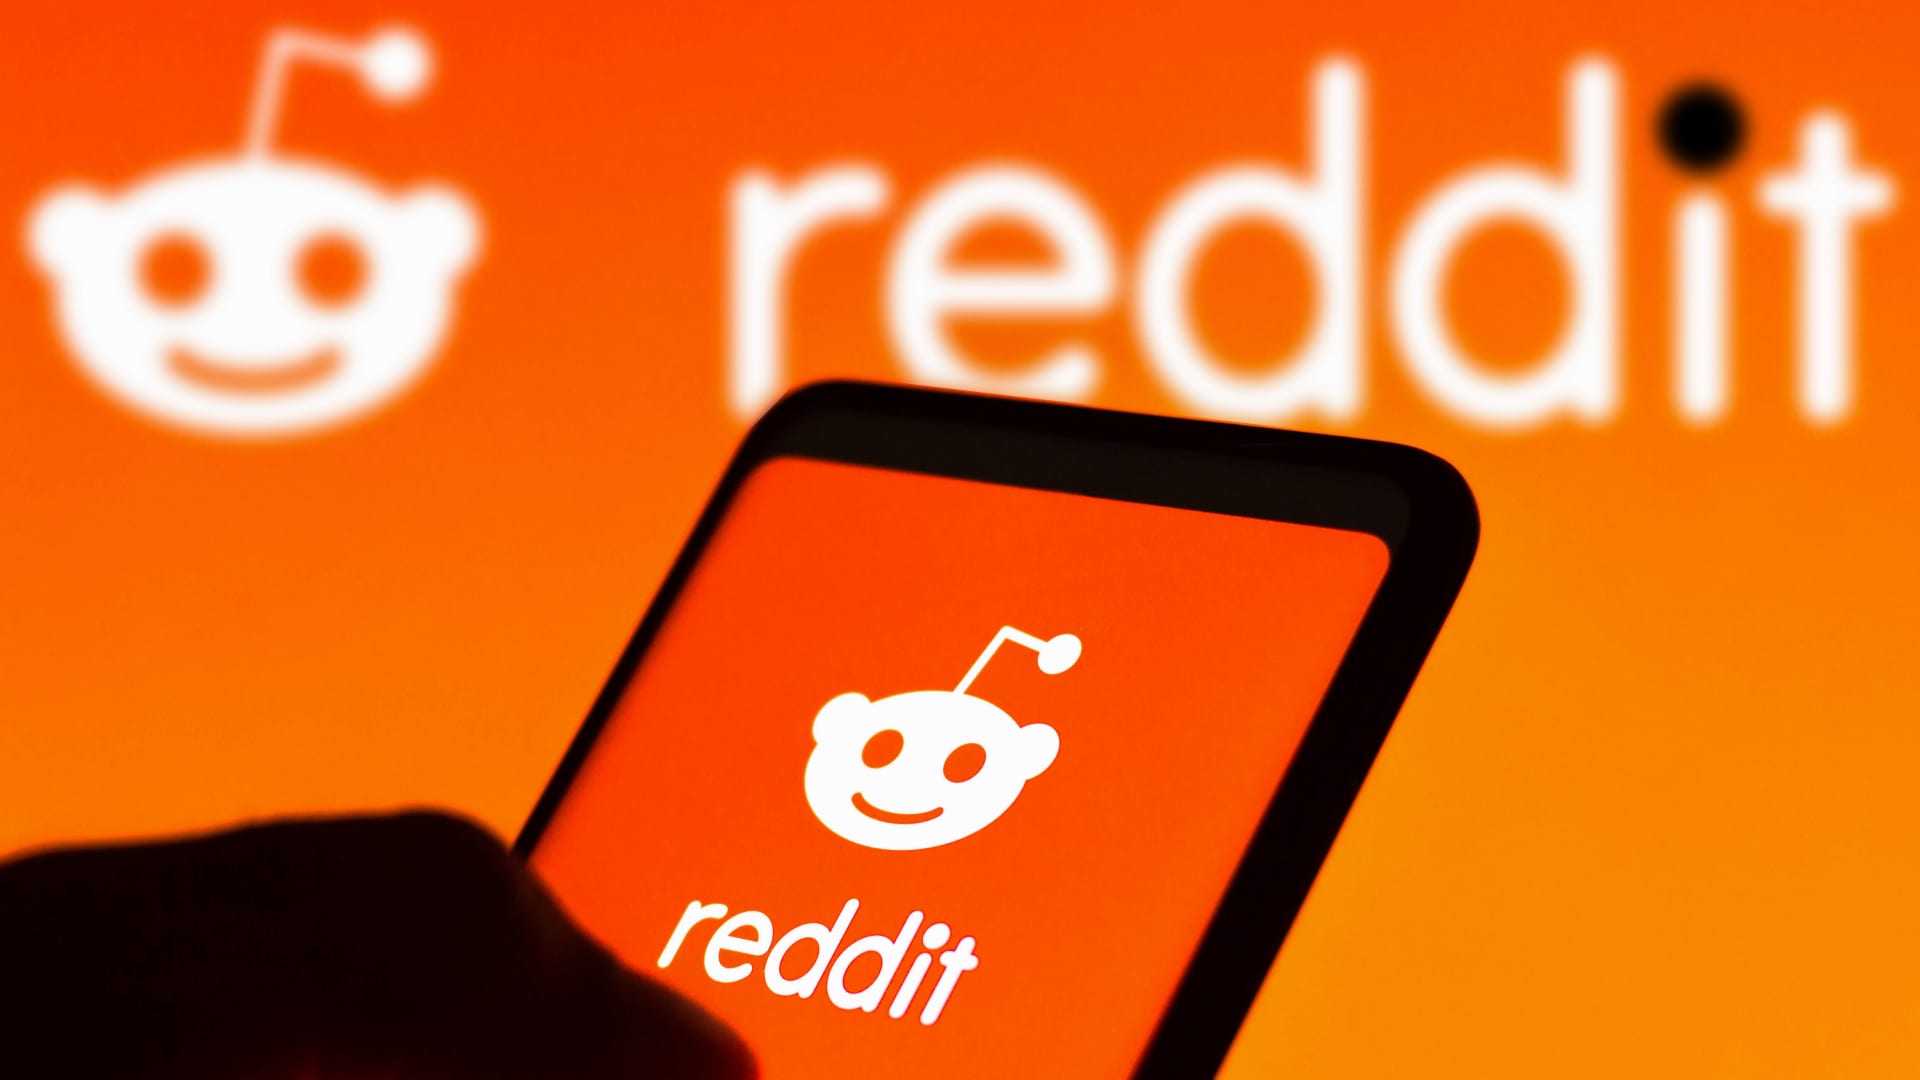 how-to-find-someone-on-reddit-with-their-phone-number